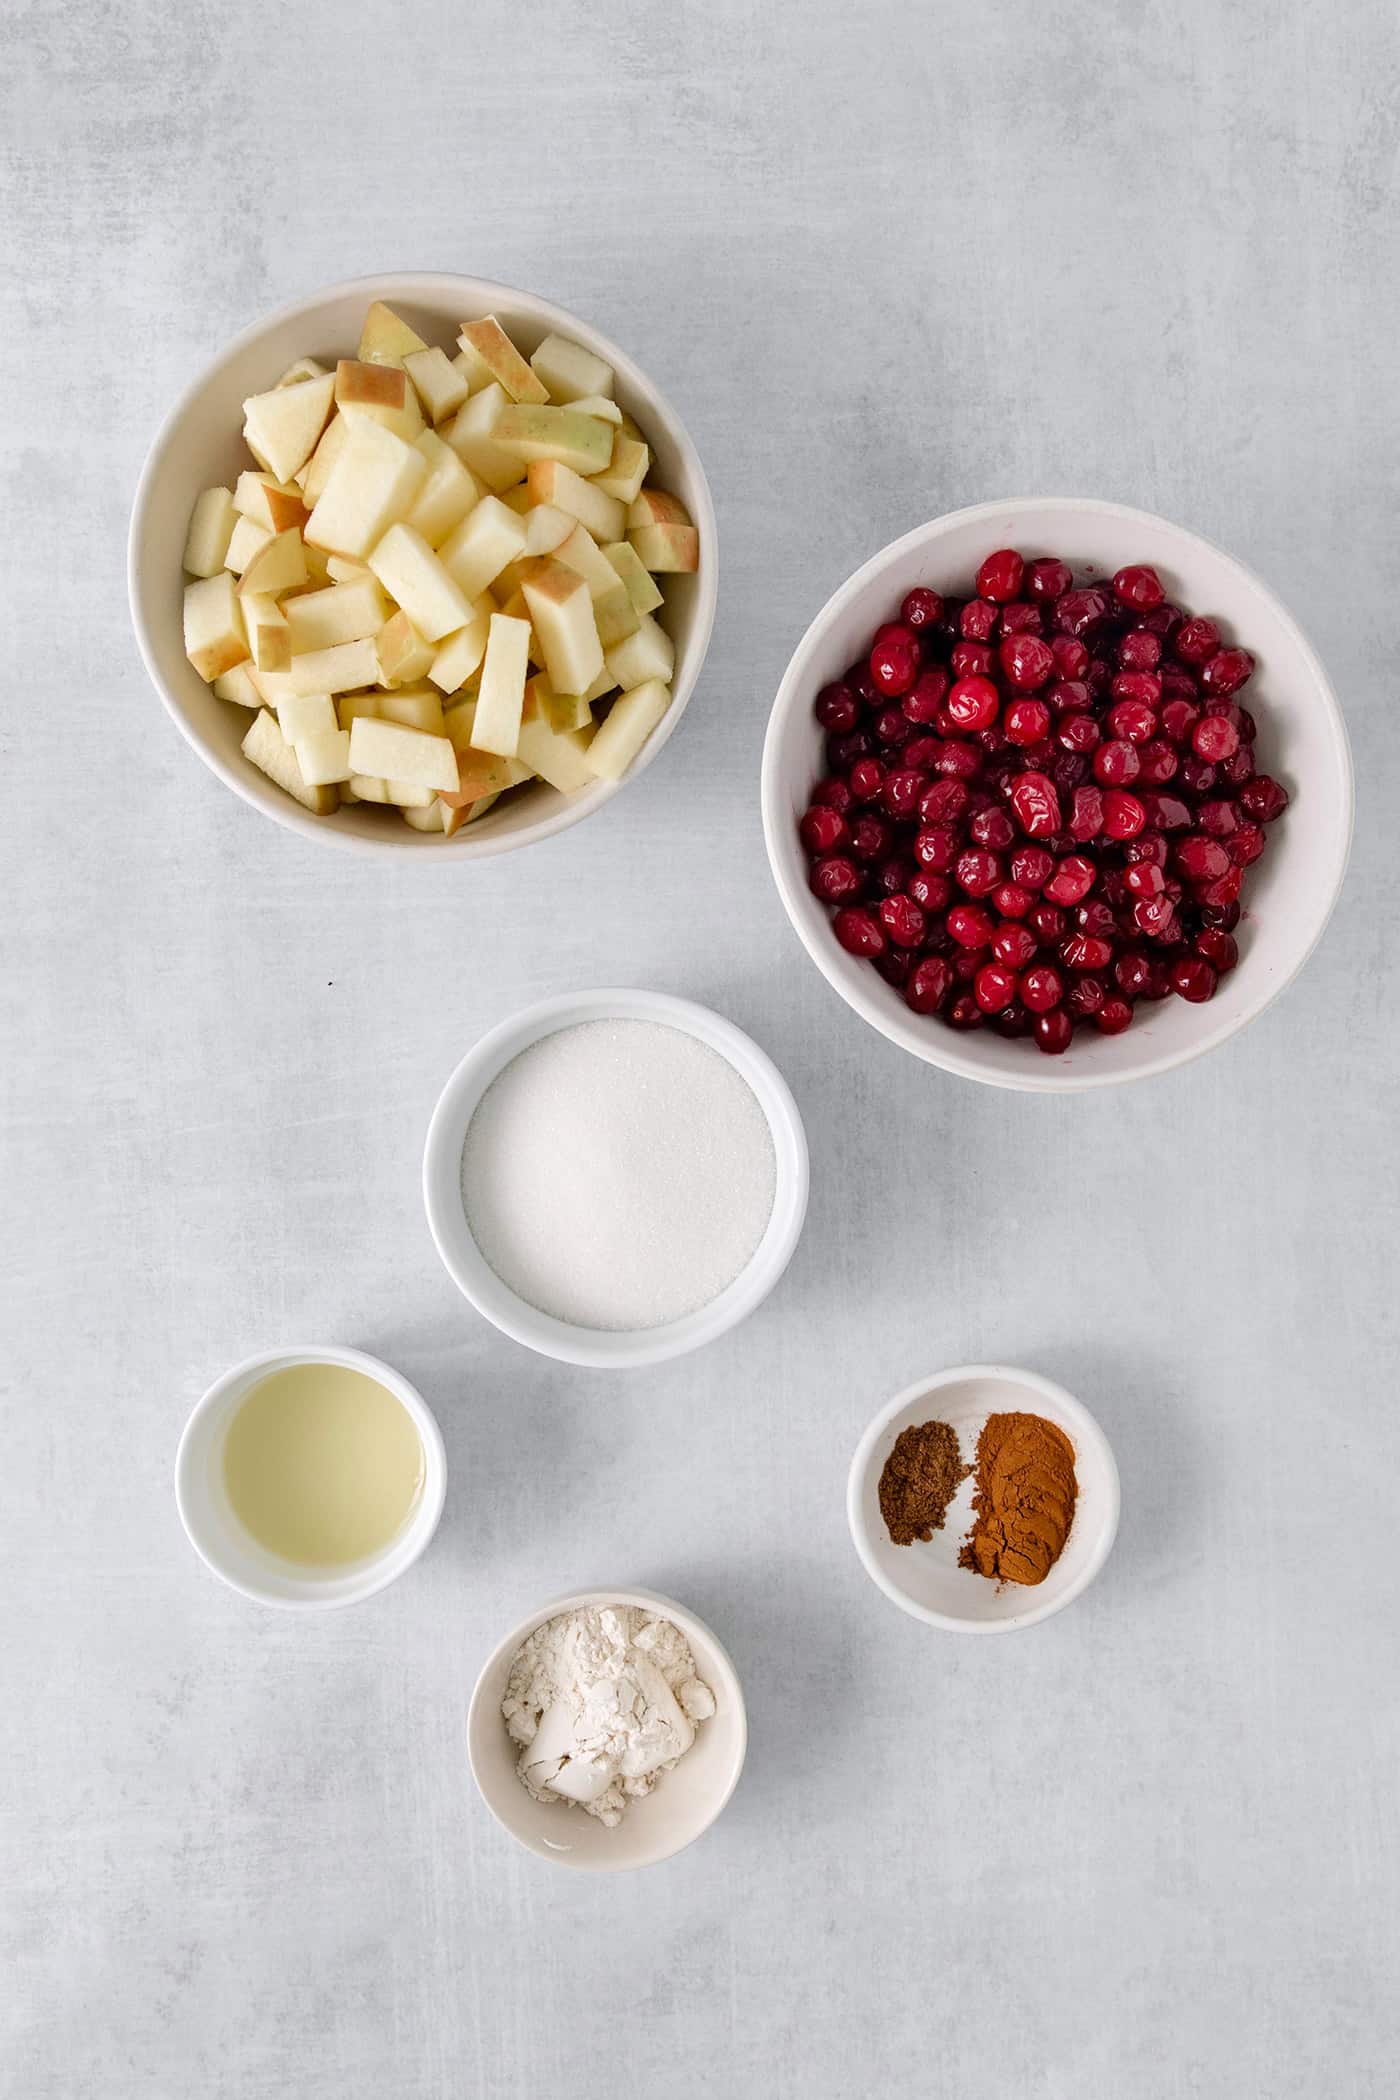 Ingredients for cranberry apple crisp filling are shown portioned out in bowls: cut apples, cranberries, sugar, spices, flour.